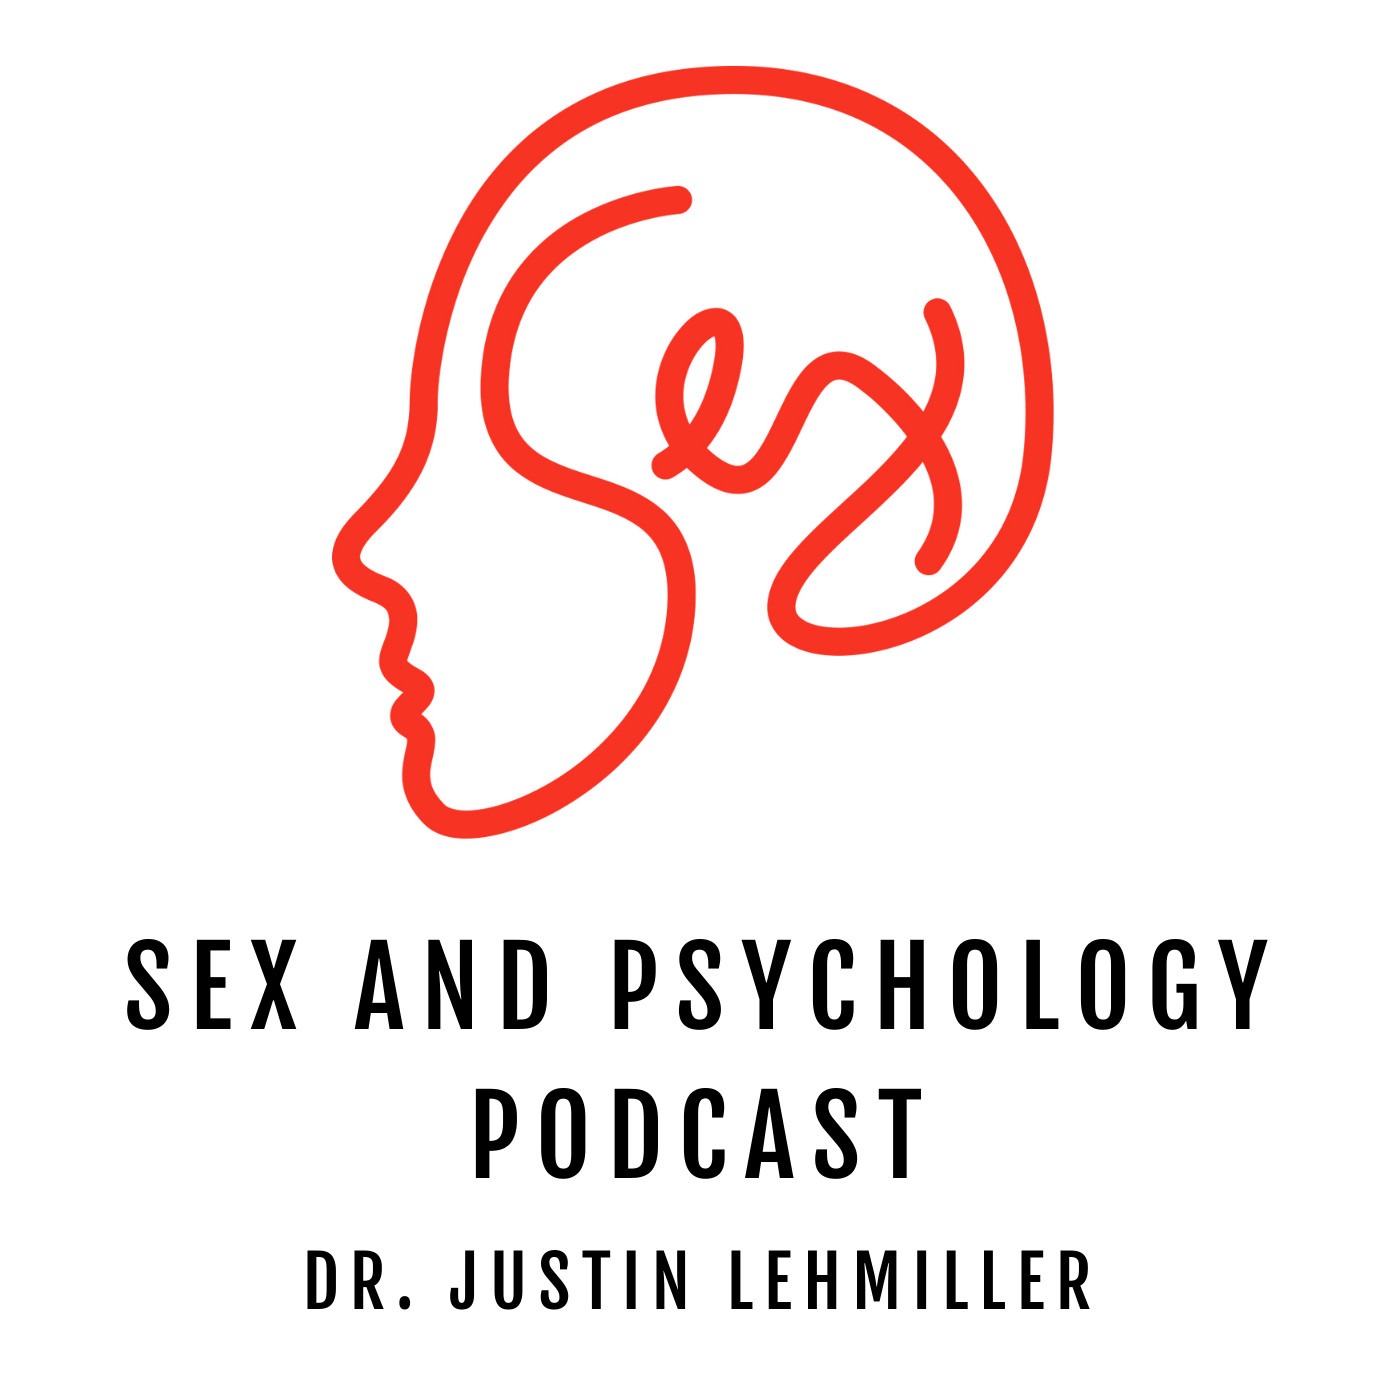 Muck Rack Sex And Psychology Podcast Contact Information Journalists And Overview